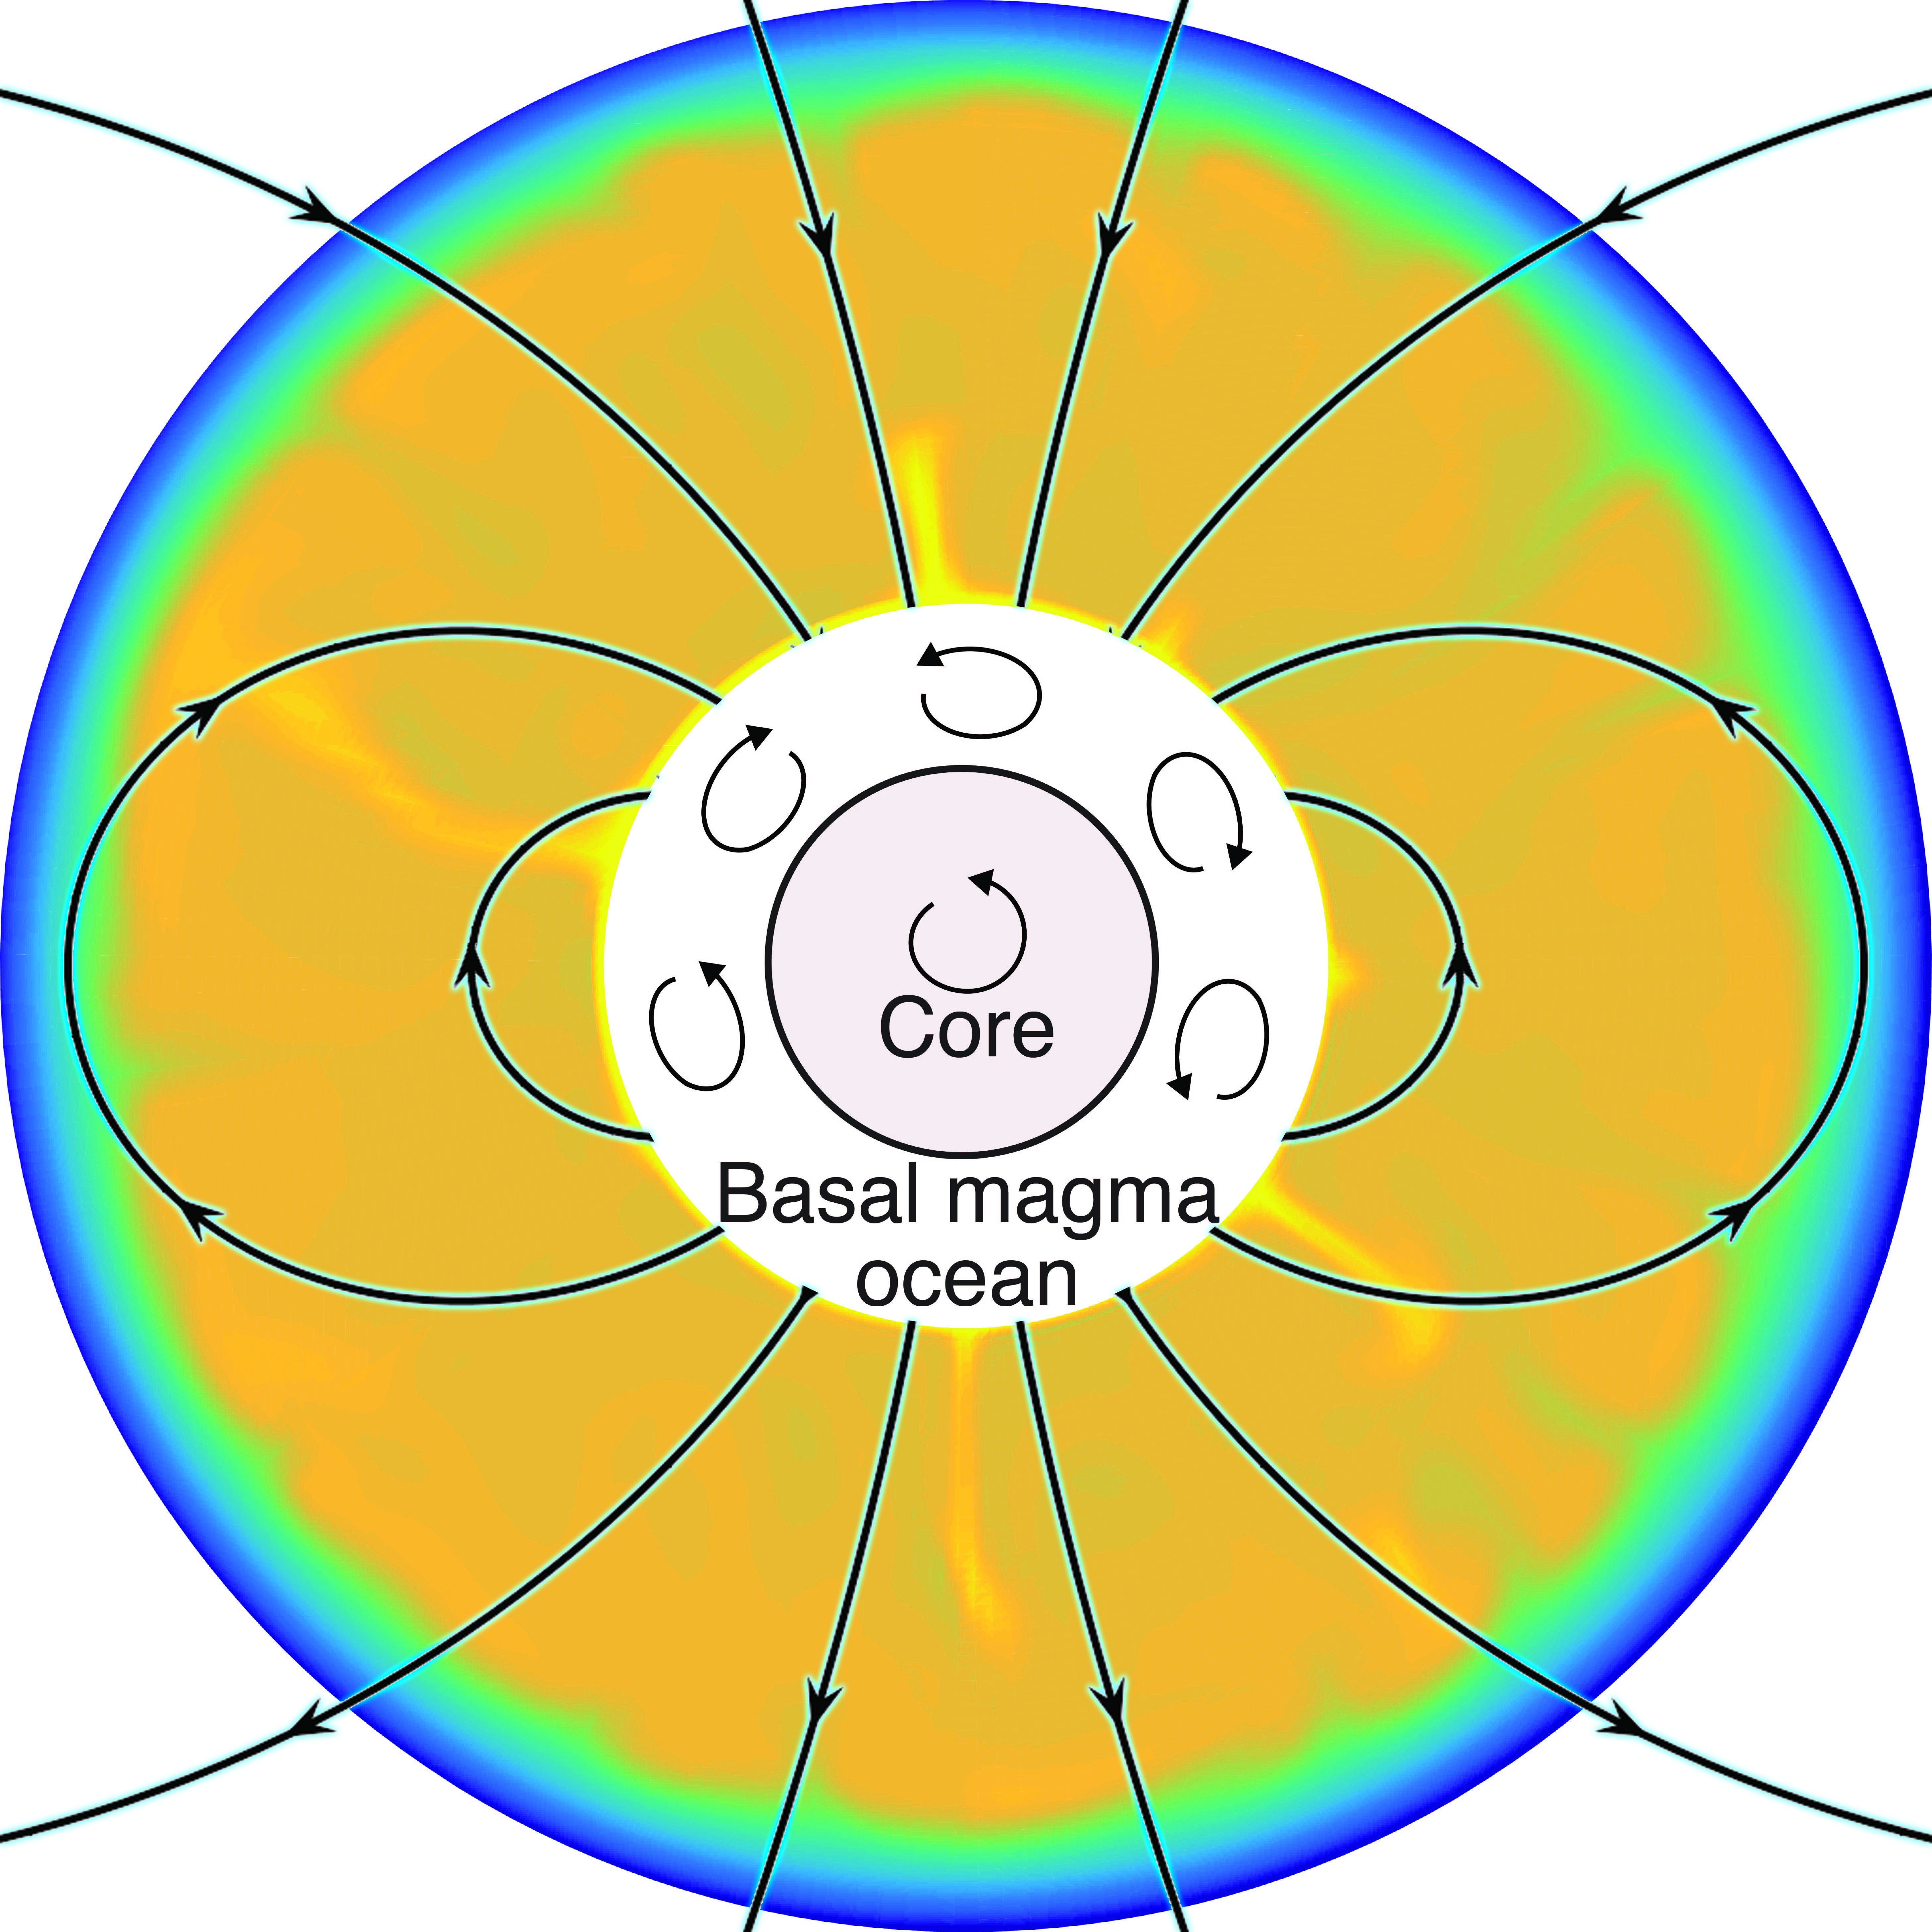 Graphic depicting the how the Moon's mantle melts to form a basal magma ocean.